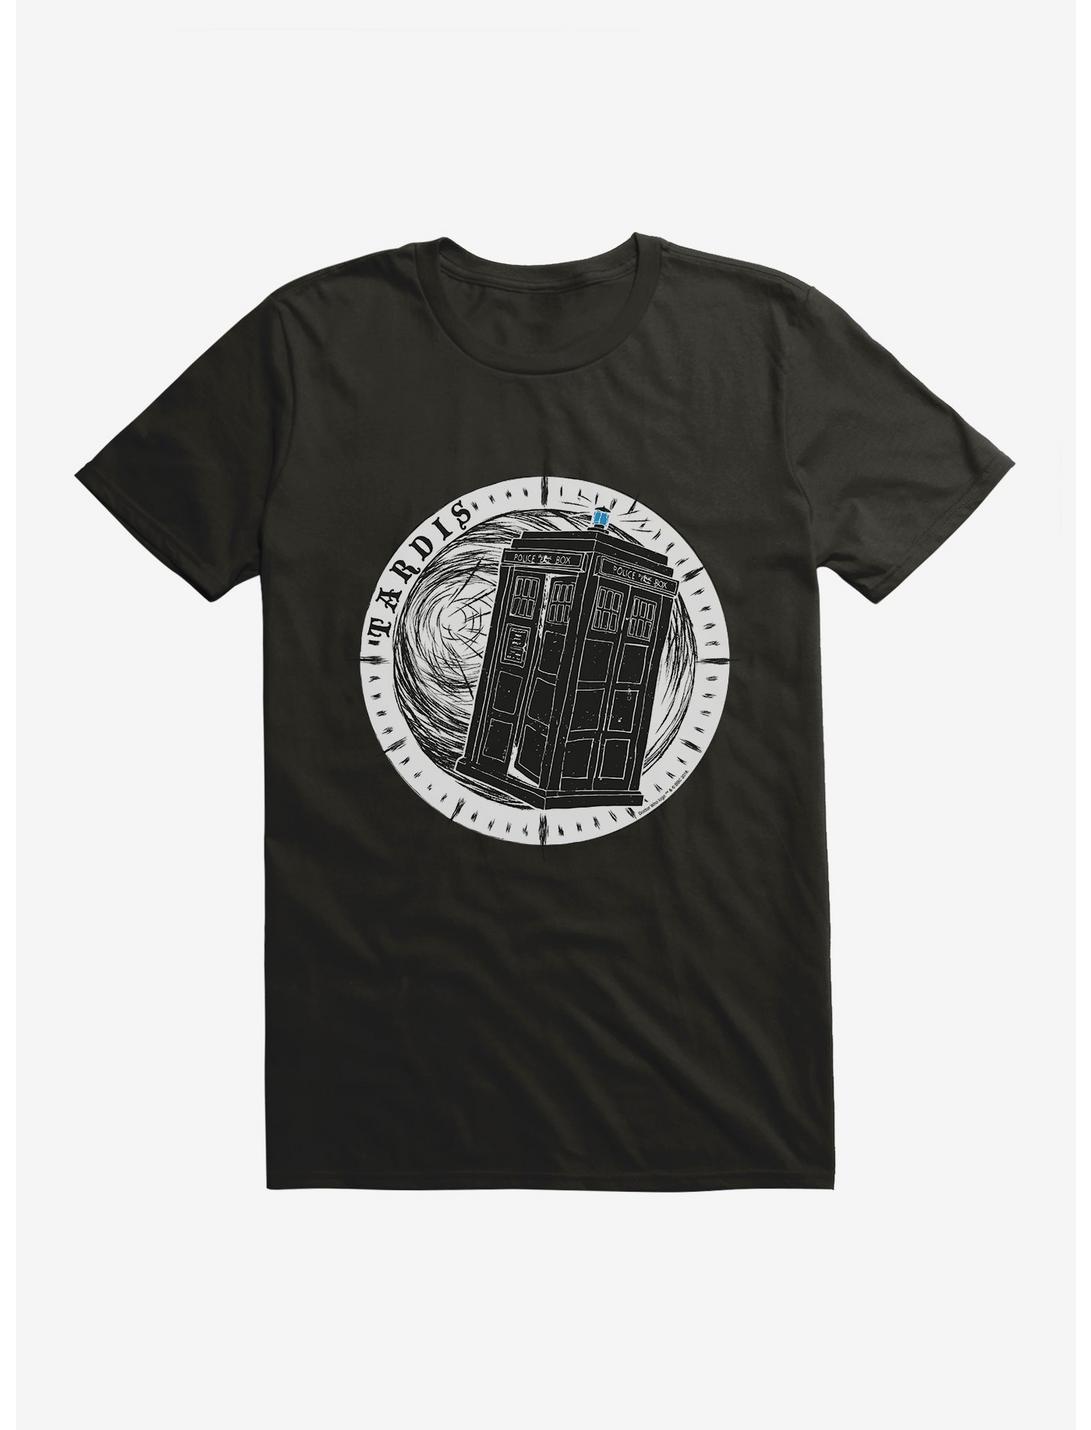 Doctor Who TARDIS Grayscale Sketch T-Shirt, , hi-res